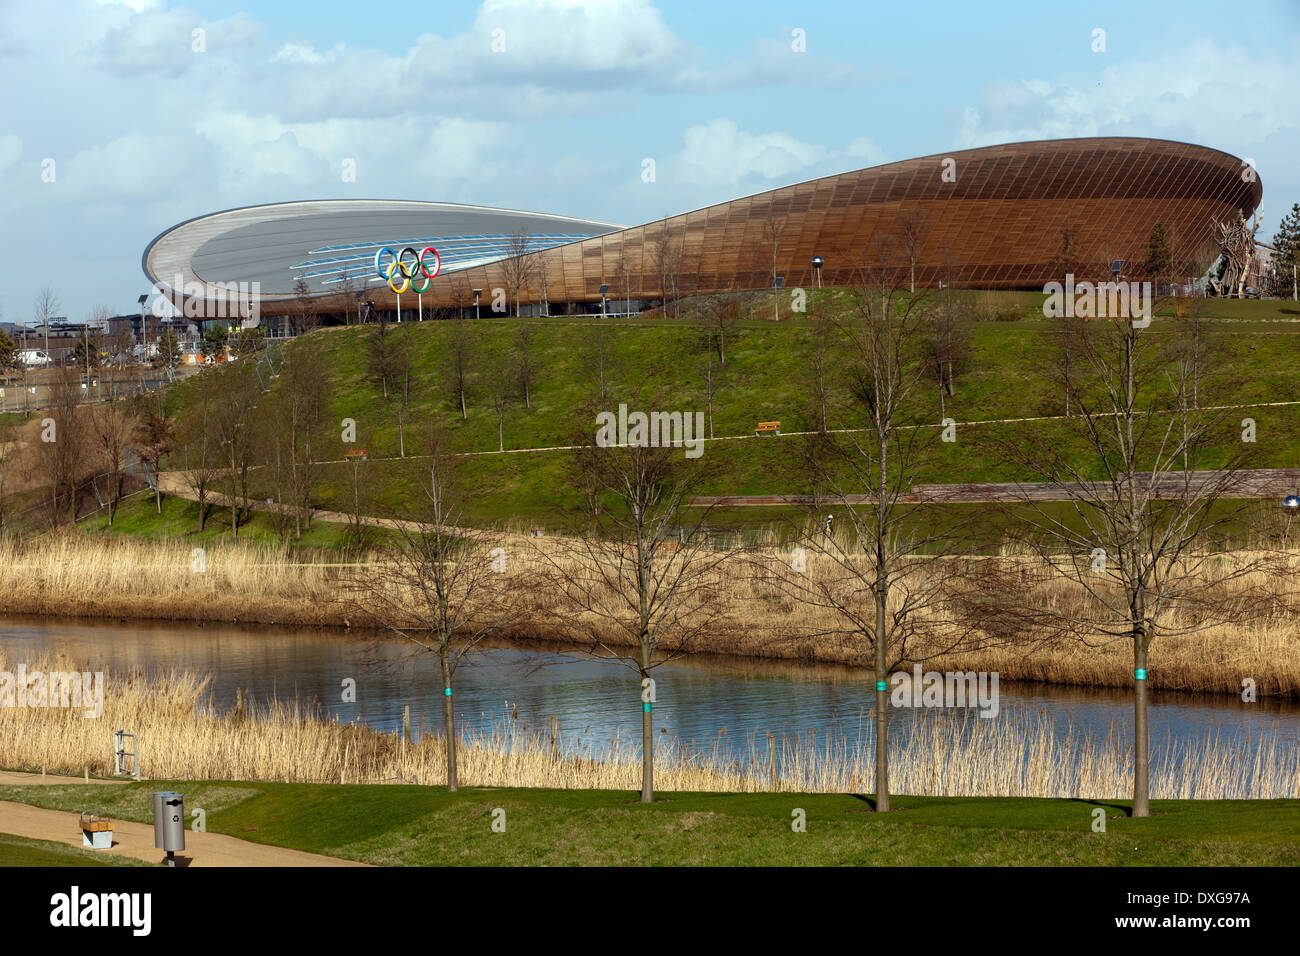 The Lee Valley VeloPark in the Queen Elizabeth Olympic Park, Stratford. Stock Photo